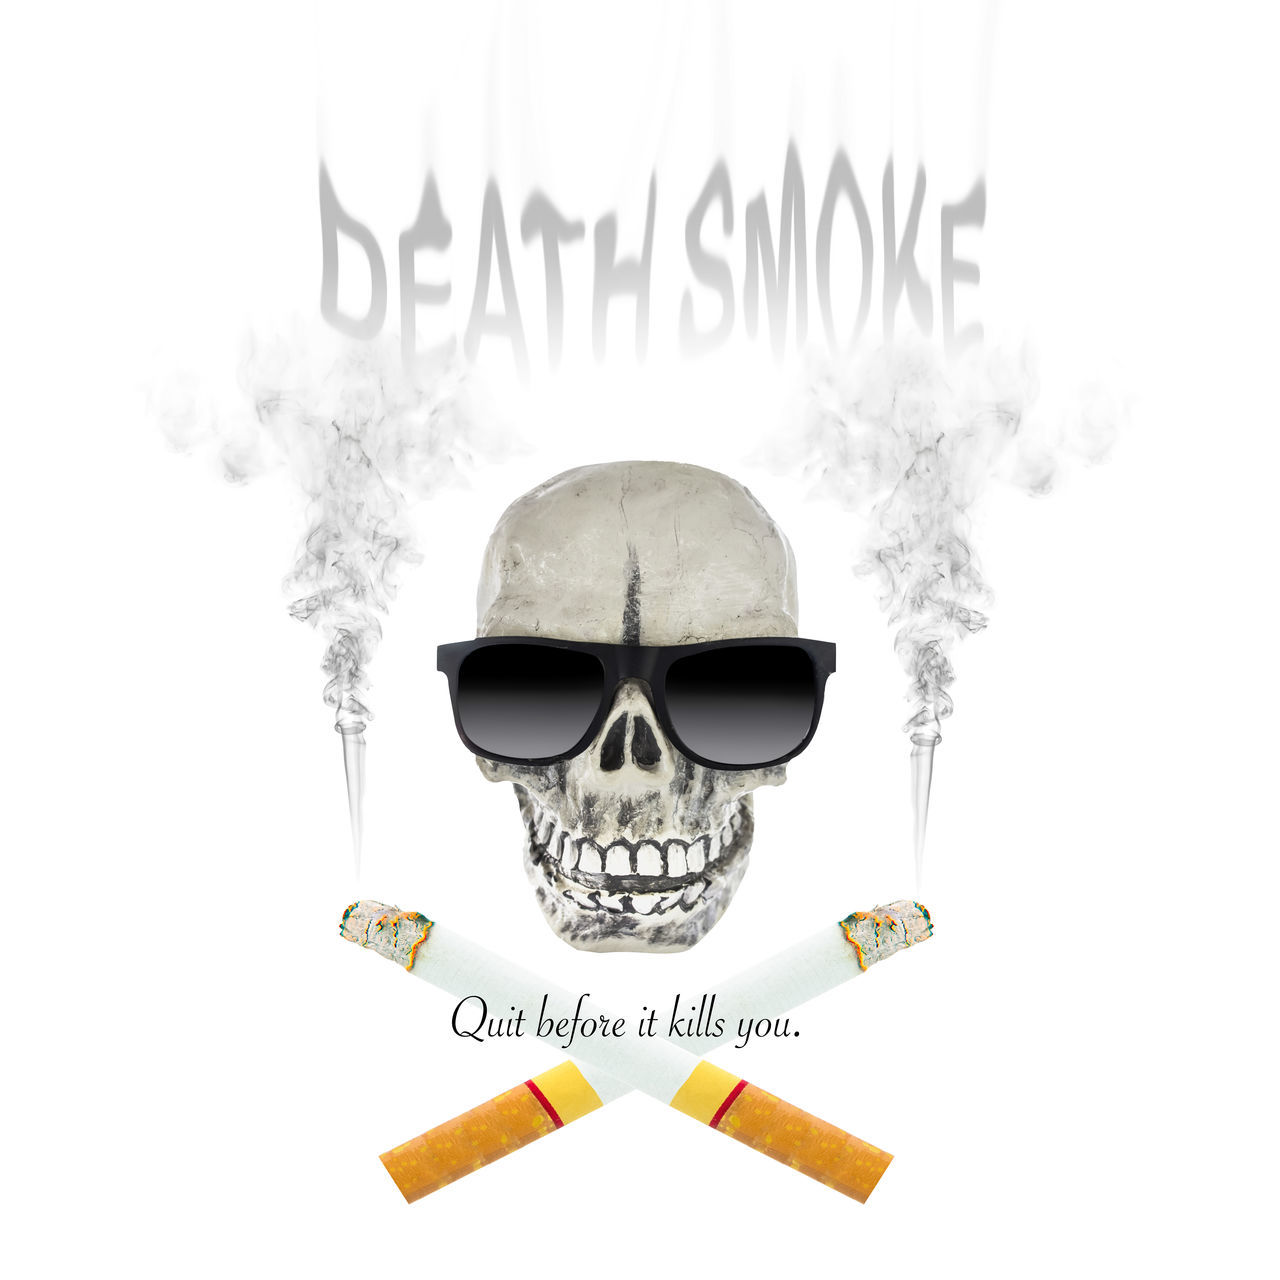 cigarette and skull isolated on white background. 31 May Scary Addict Addiction Anatomy Awareness Background Black Body Bone  Burn Campaign Cigarette  Concept Danger Day Dead Death Design Face Graphic Halloween Harmful HEAD Health Hell Horror Human Isolated No Object Part Quit RISK Sign Skeleton Skull Smoke Smoking Spooky Stop Symbol Tobacco Unhealthy Warning White Word